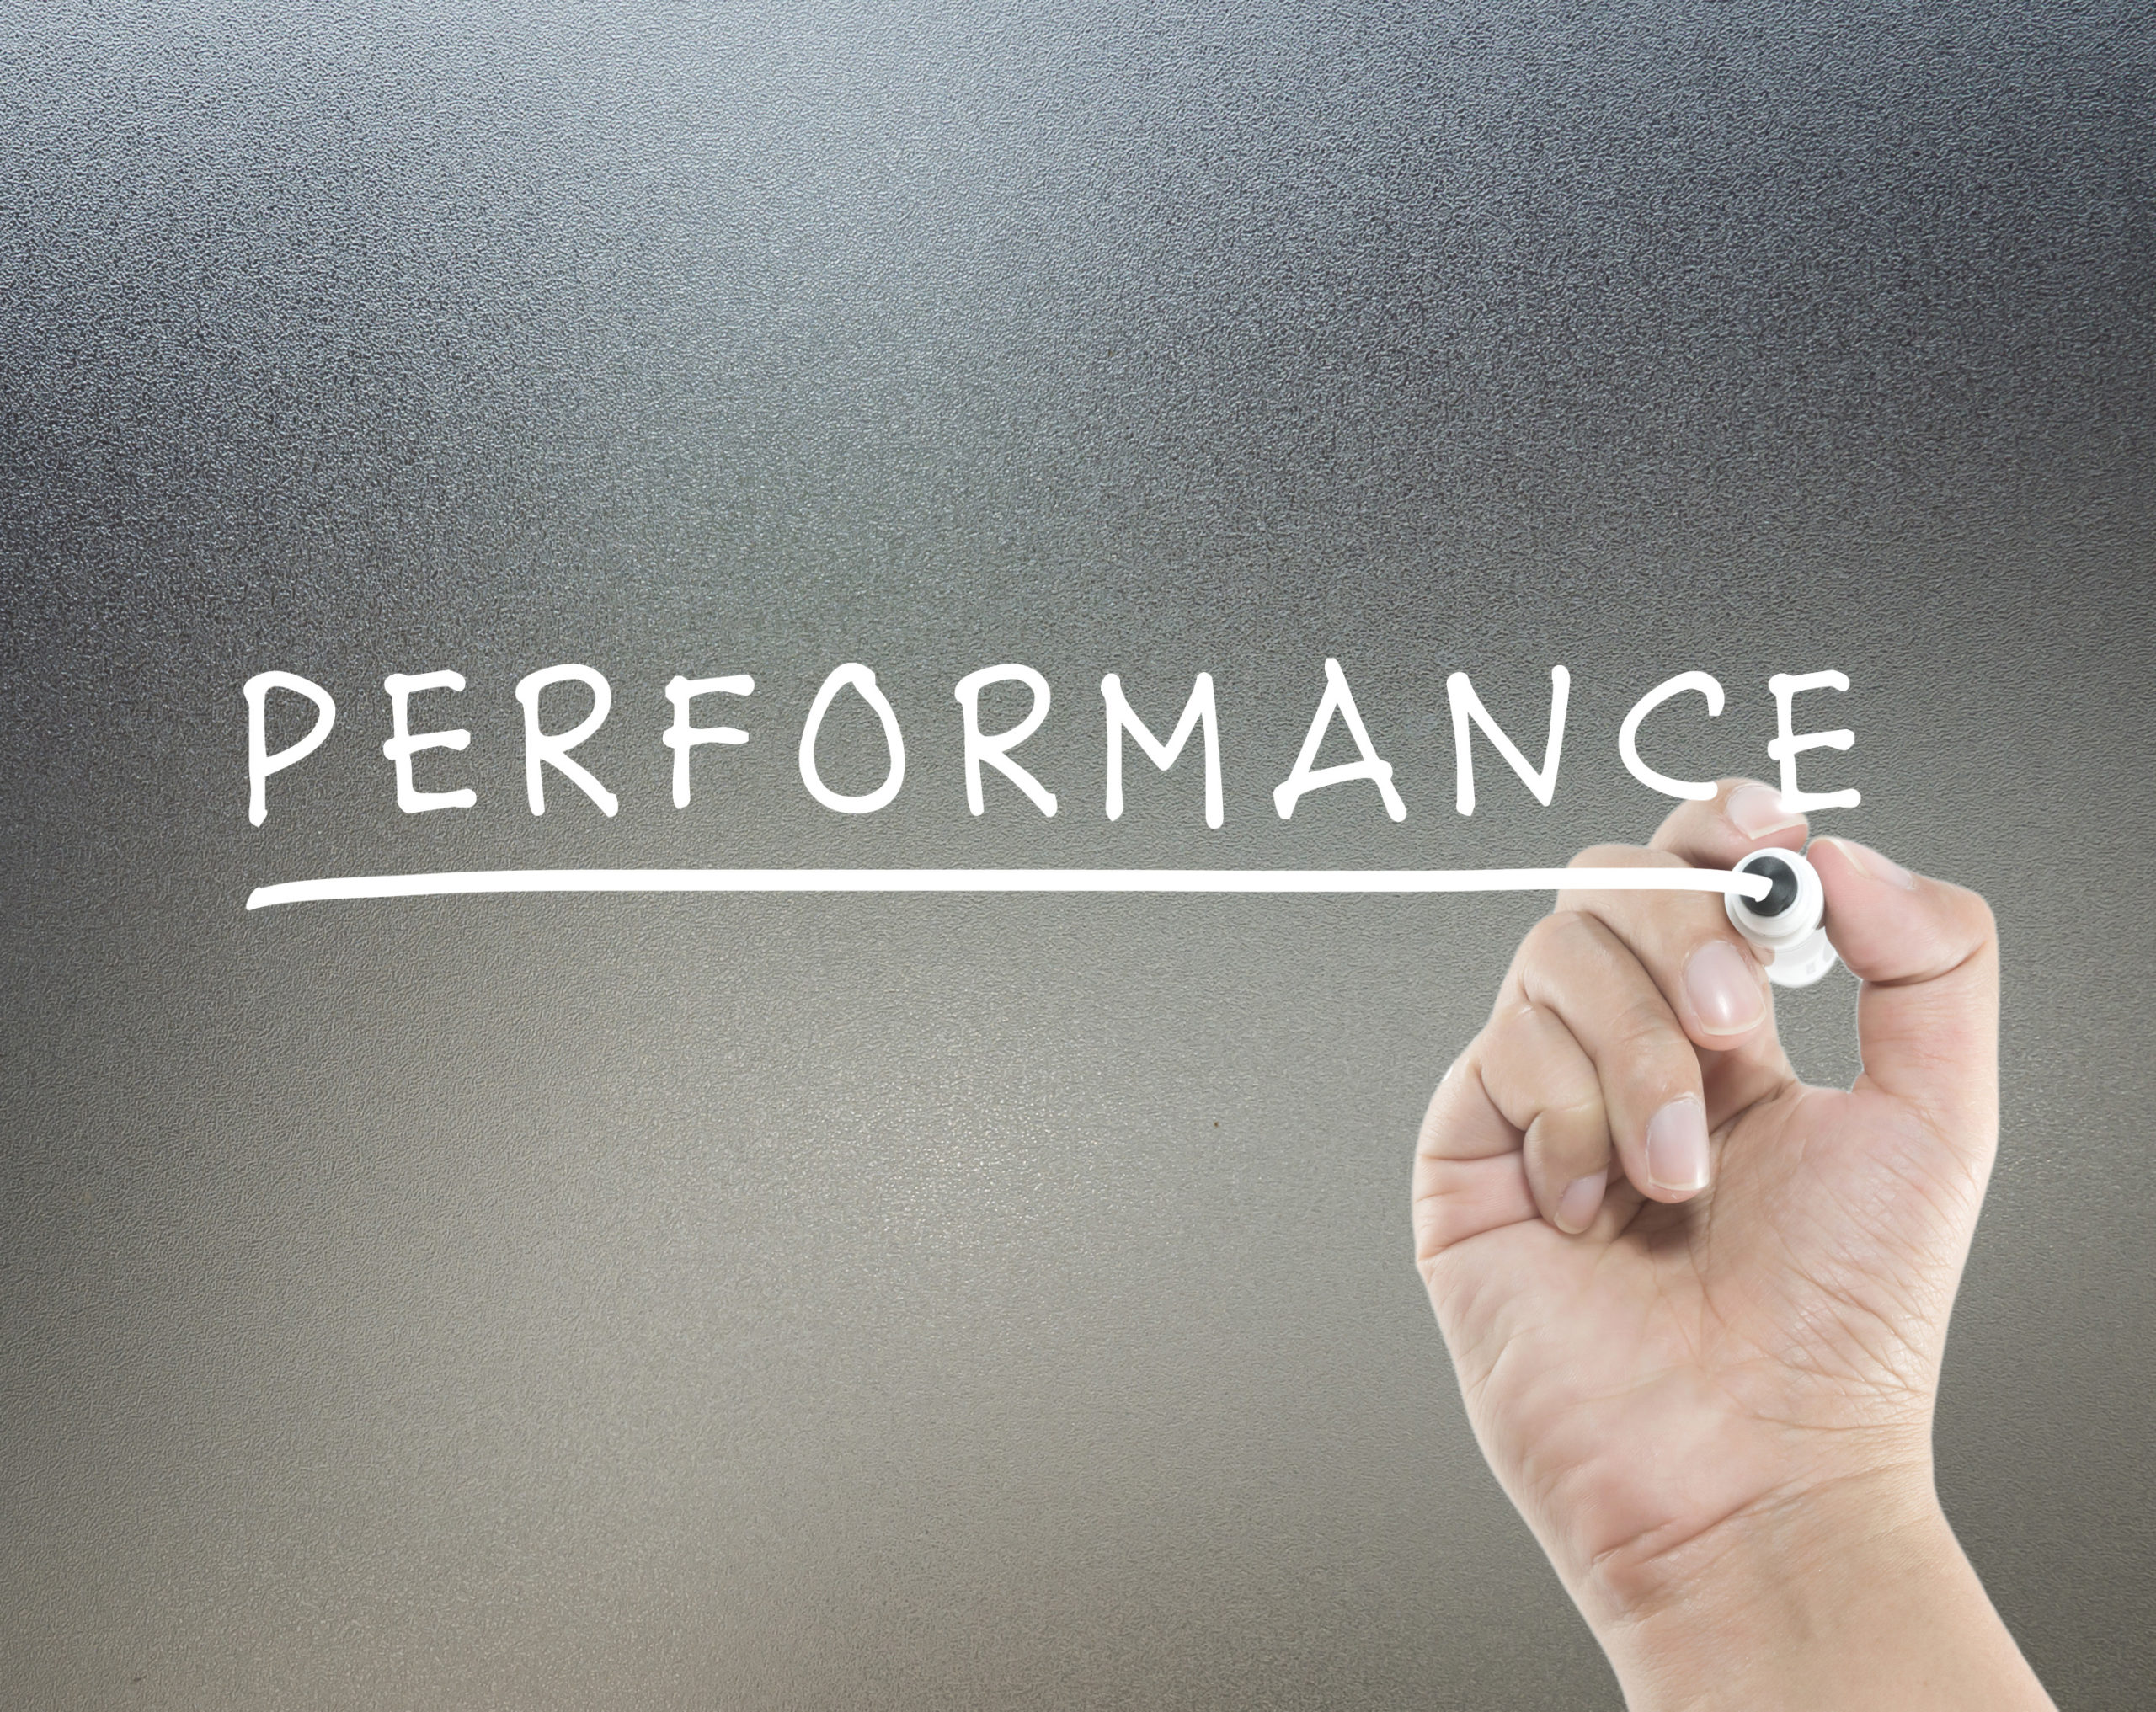 Benefits Of Using Performance Review Software